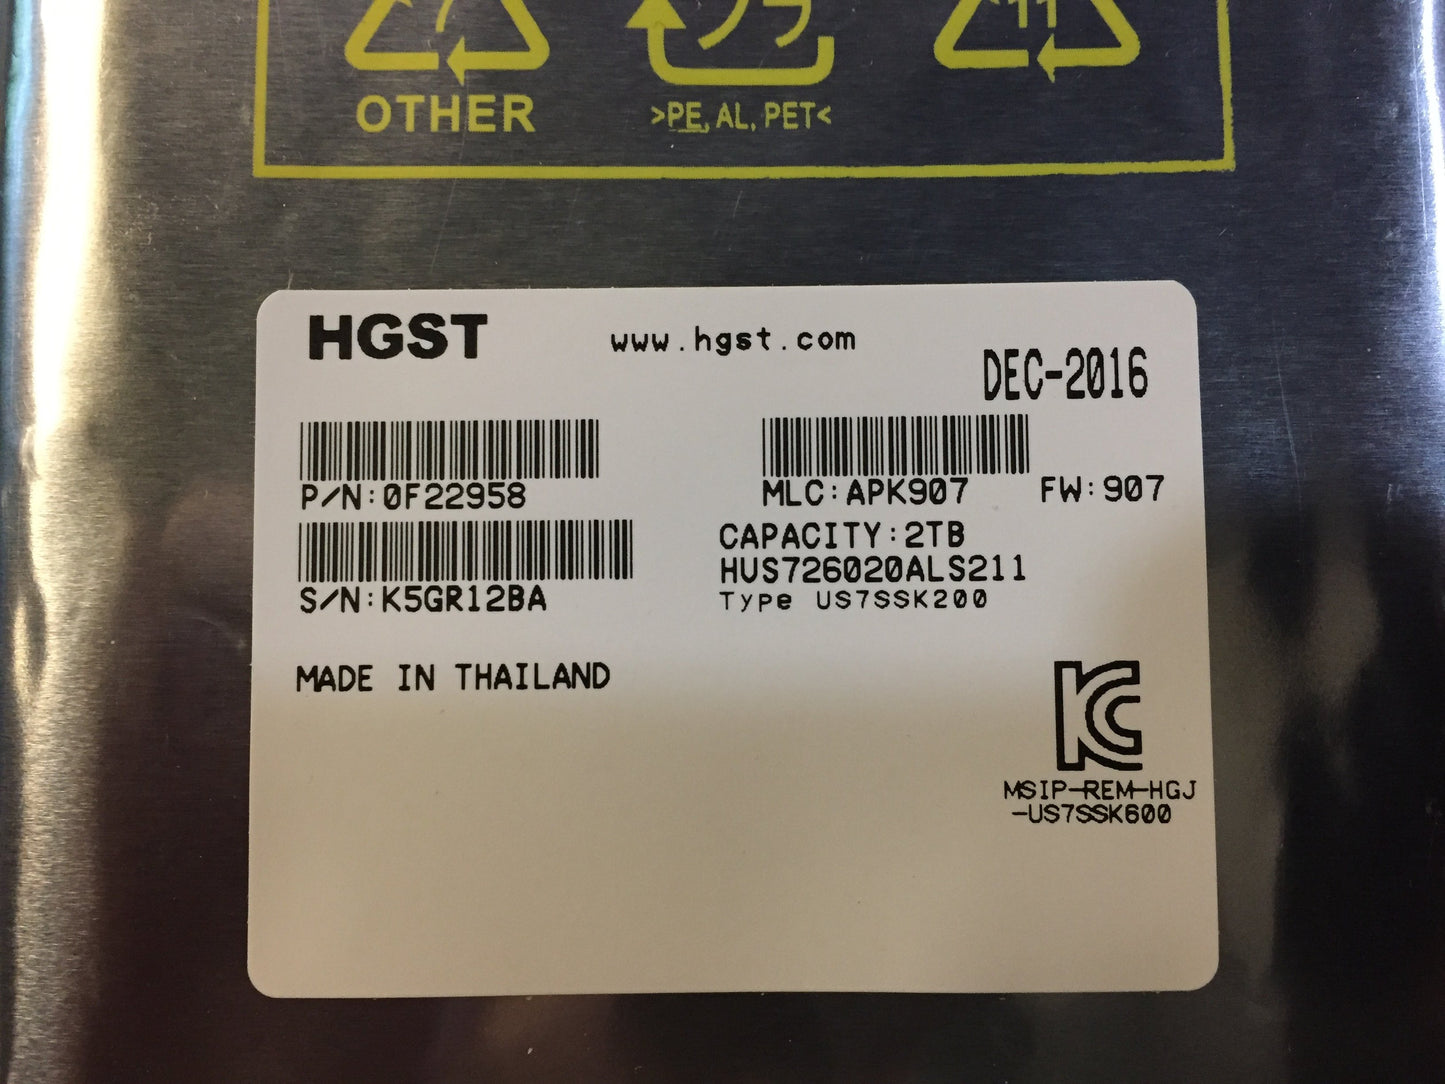 New HGST Hitachi SAS Internal Hard Drive 2TB for Sale, We Sell Professional Audio Equipment. Audio Systems, Amplifiers, Consoles, Mixers, Electronics, Entertainment, Sound, Live. 